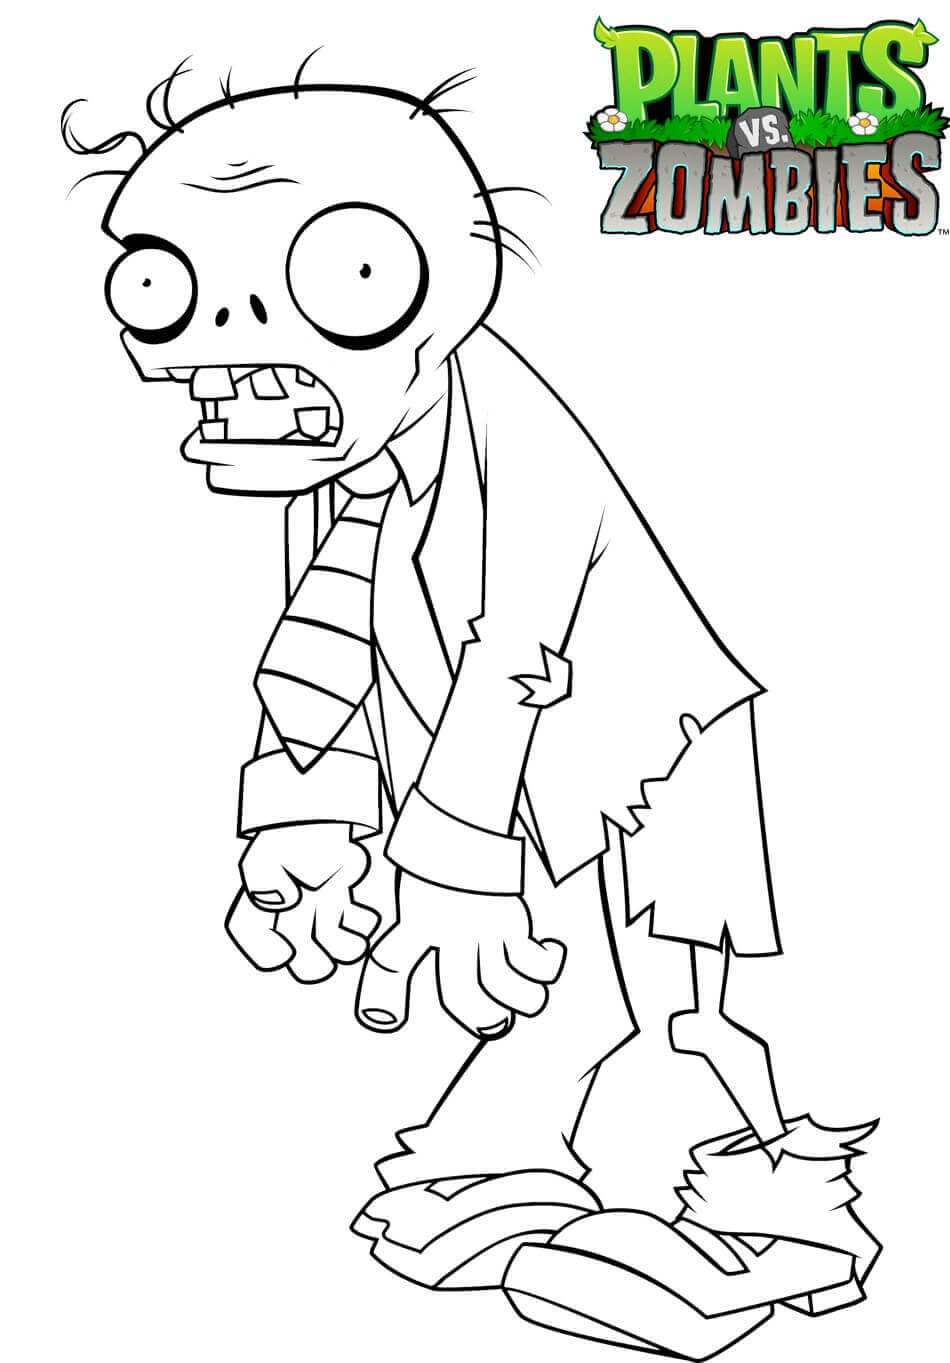 Zombie From Plants Vs Zombies Coloring Page 